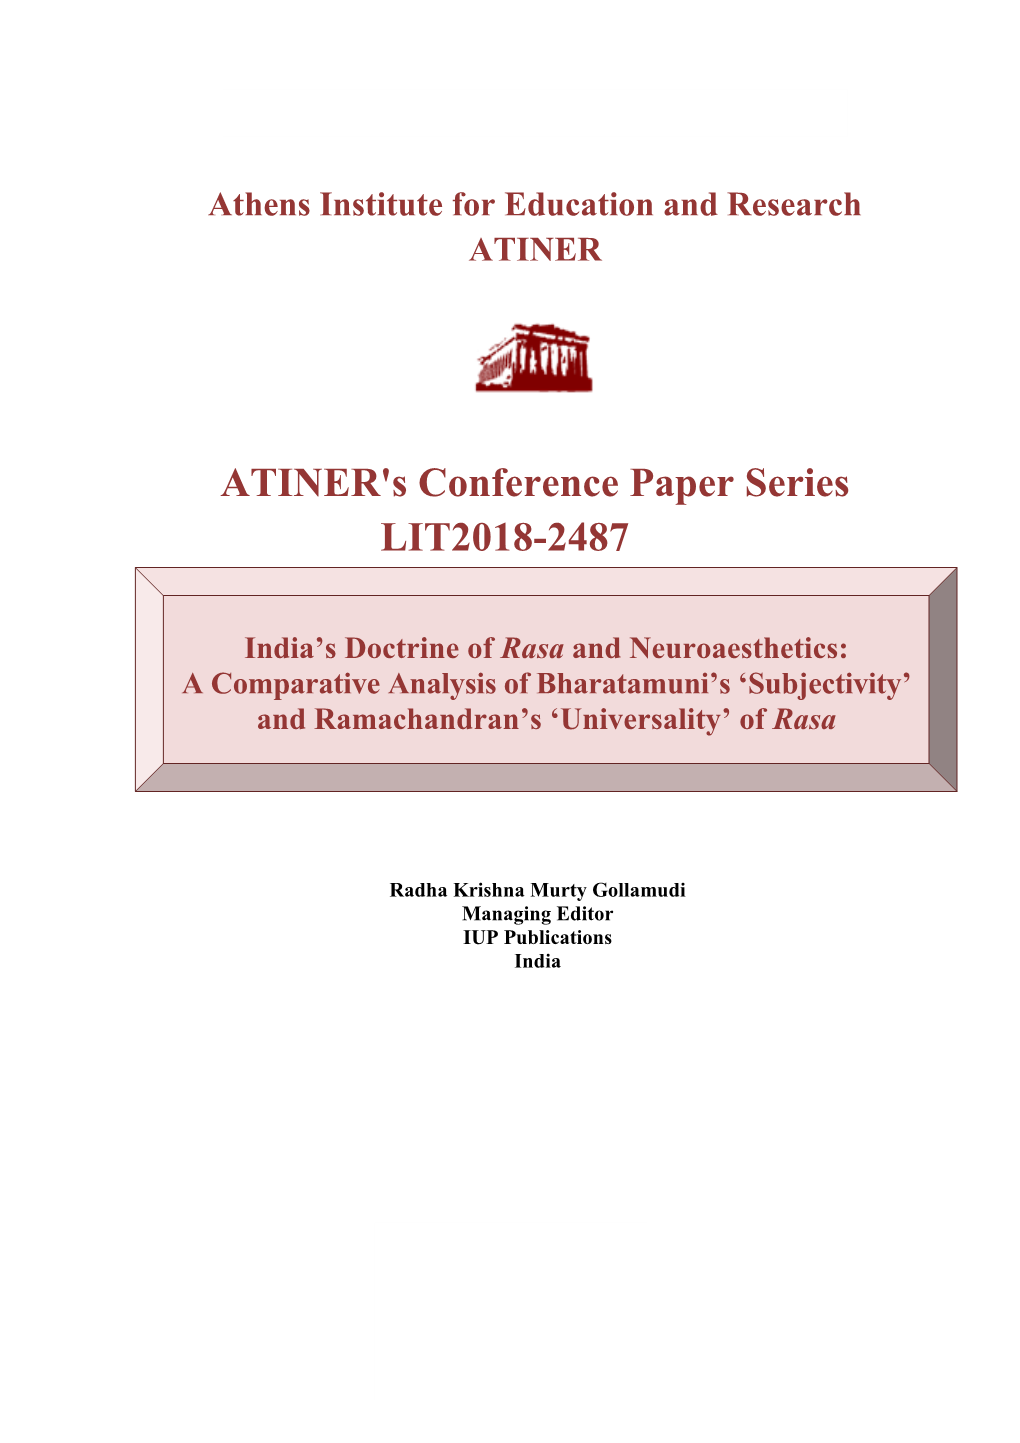 ATINER's Conference Paper Series LIT2018-2487